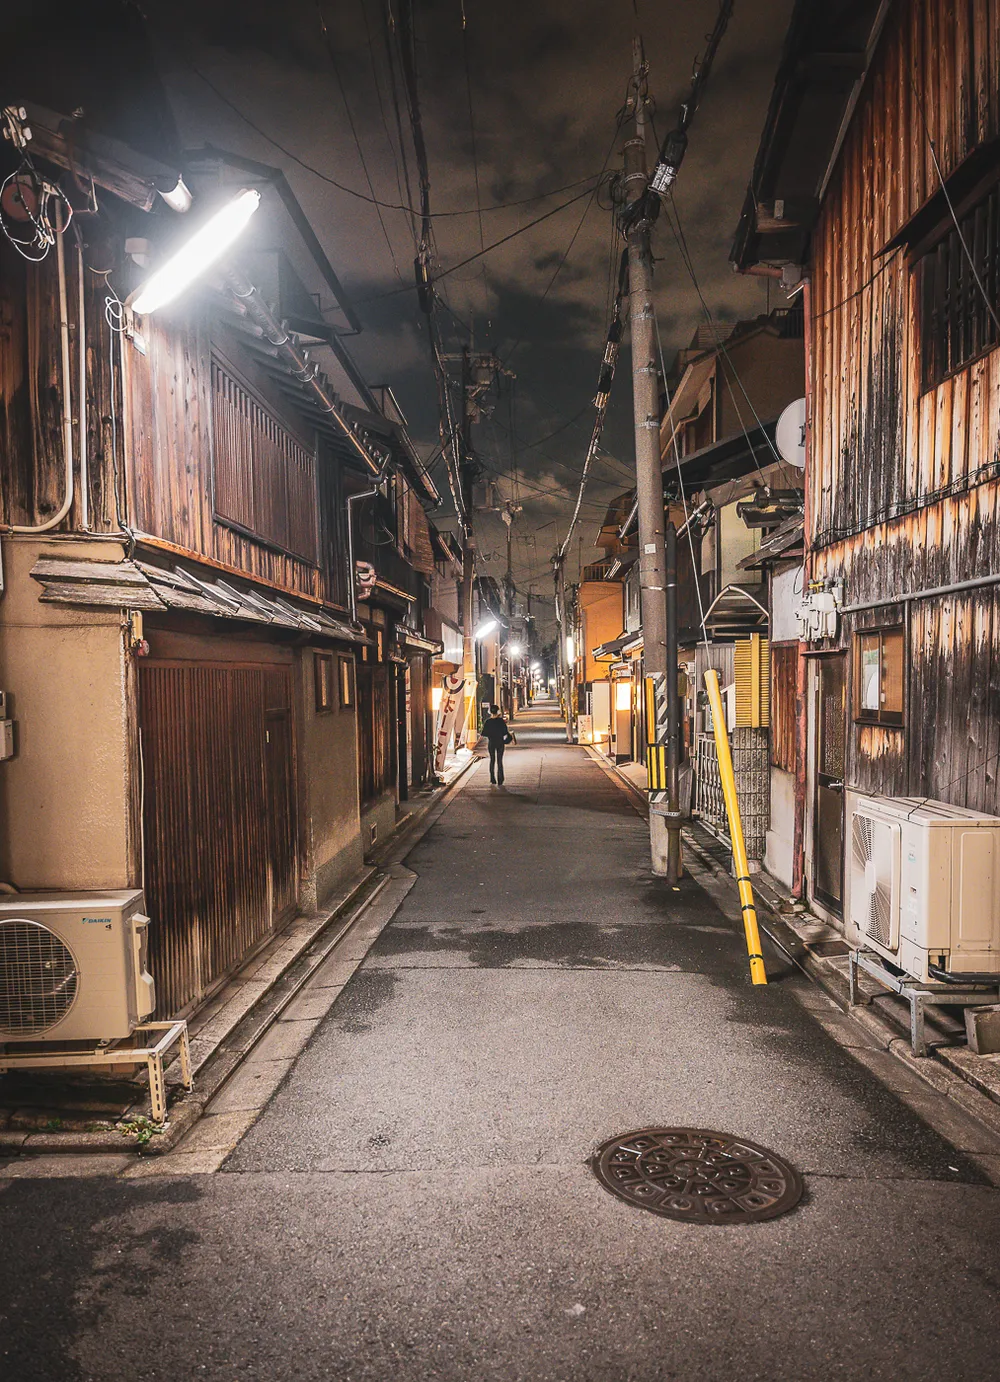 An alleyway in Kyoto Gion district.